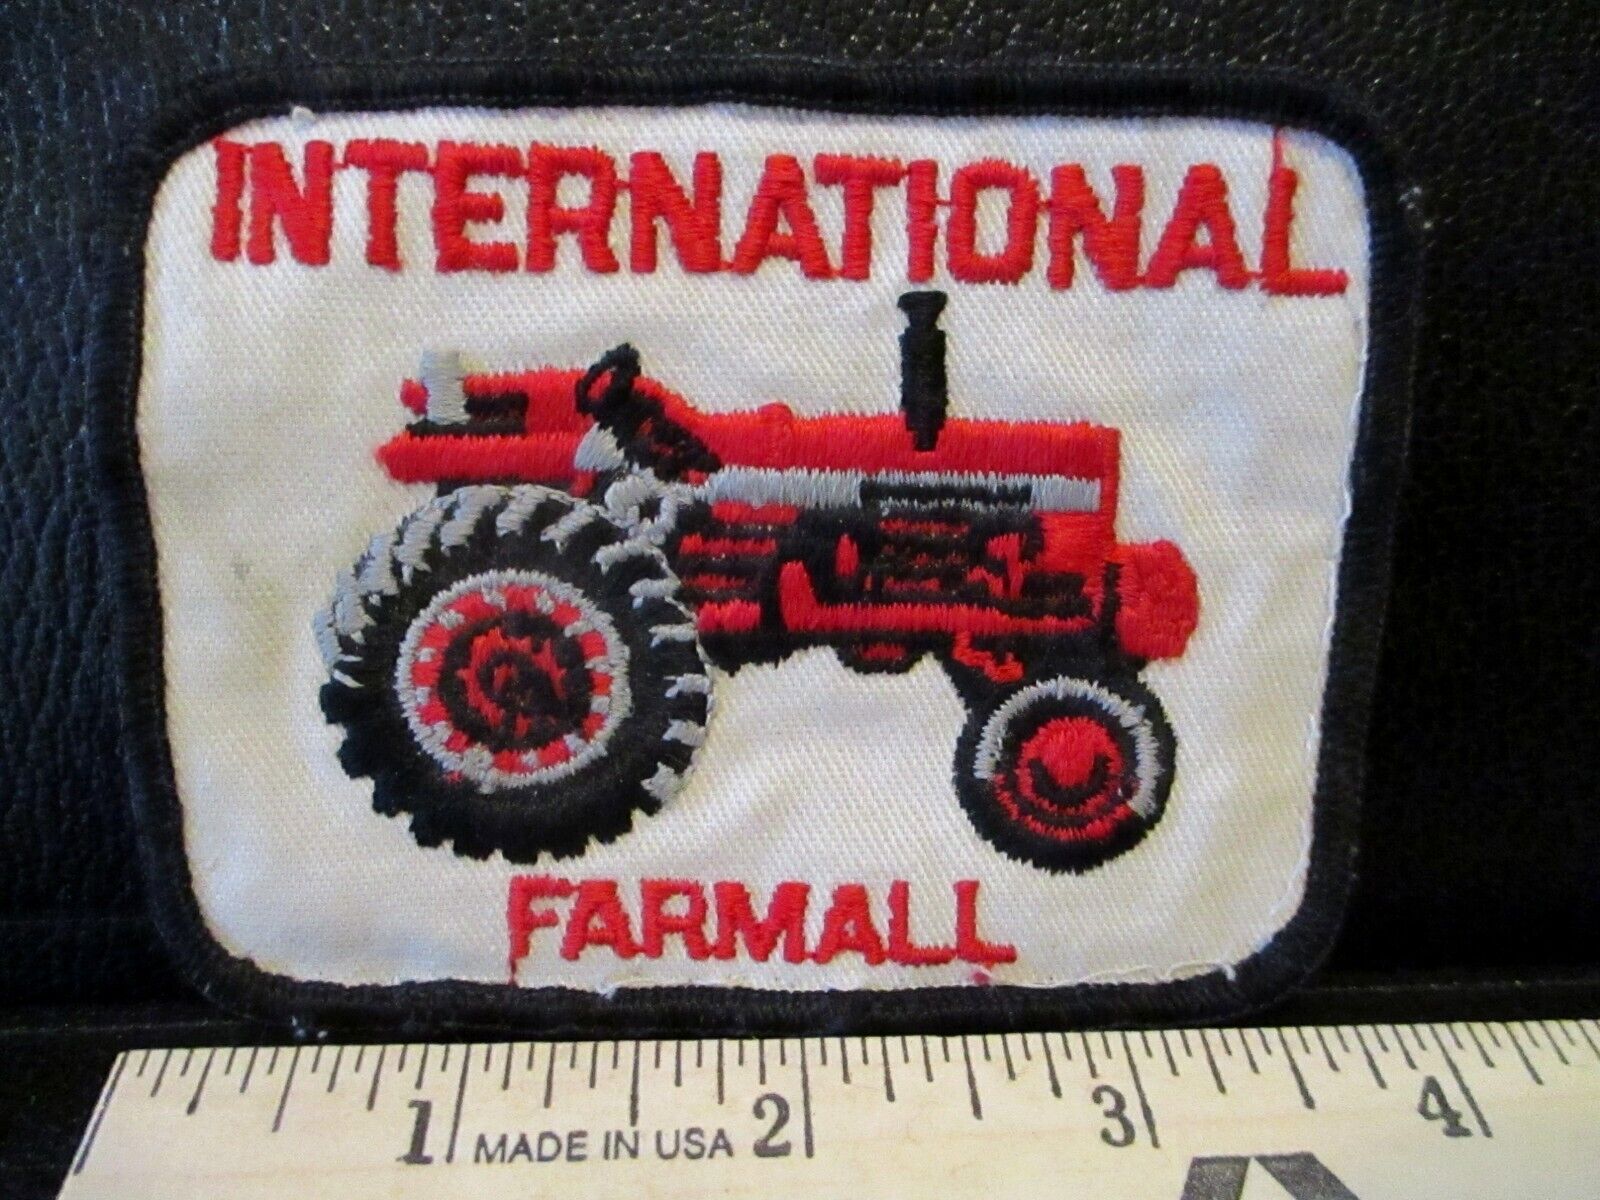 IH International Farmall 1456  1256  1206  Tractor Embroidered Patch Uniform Hat